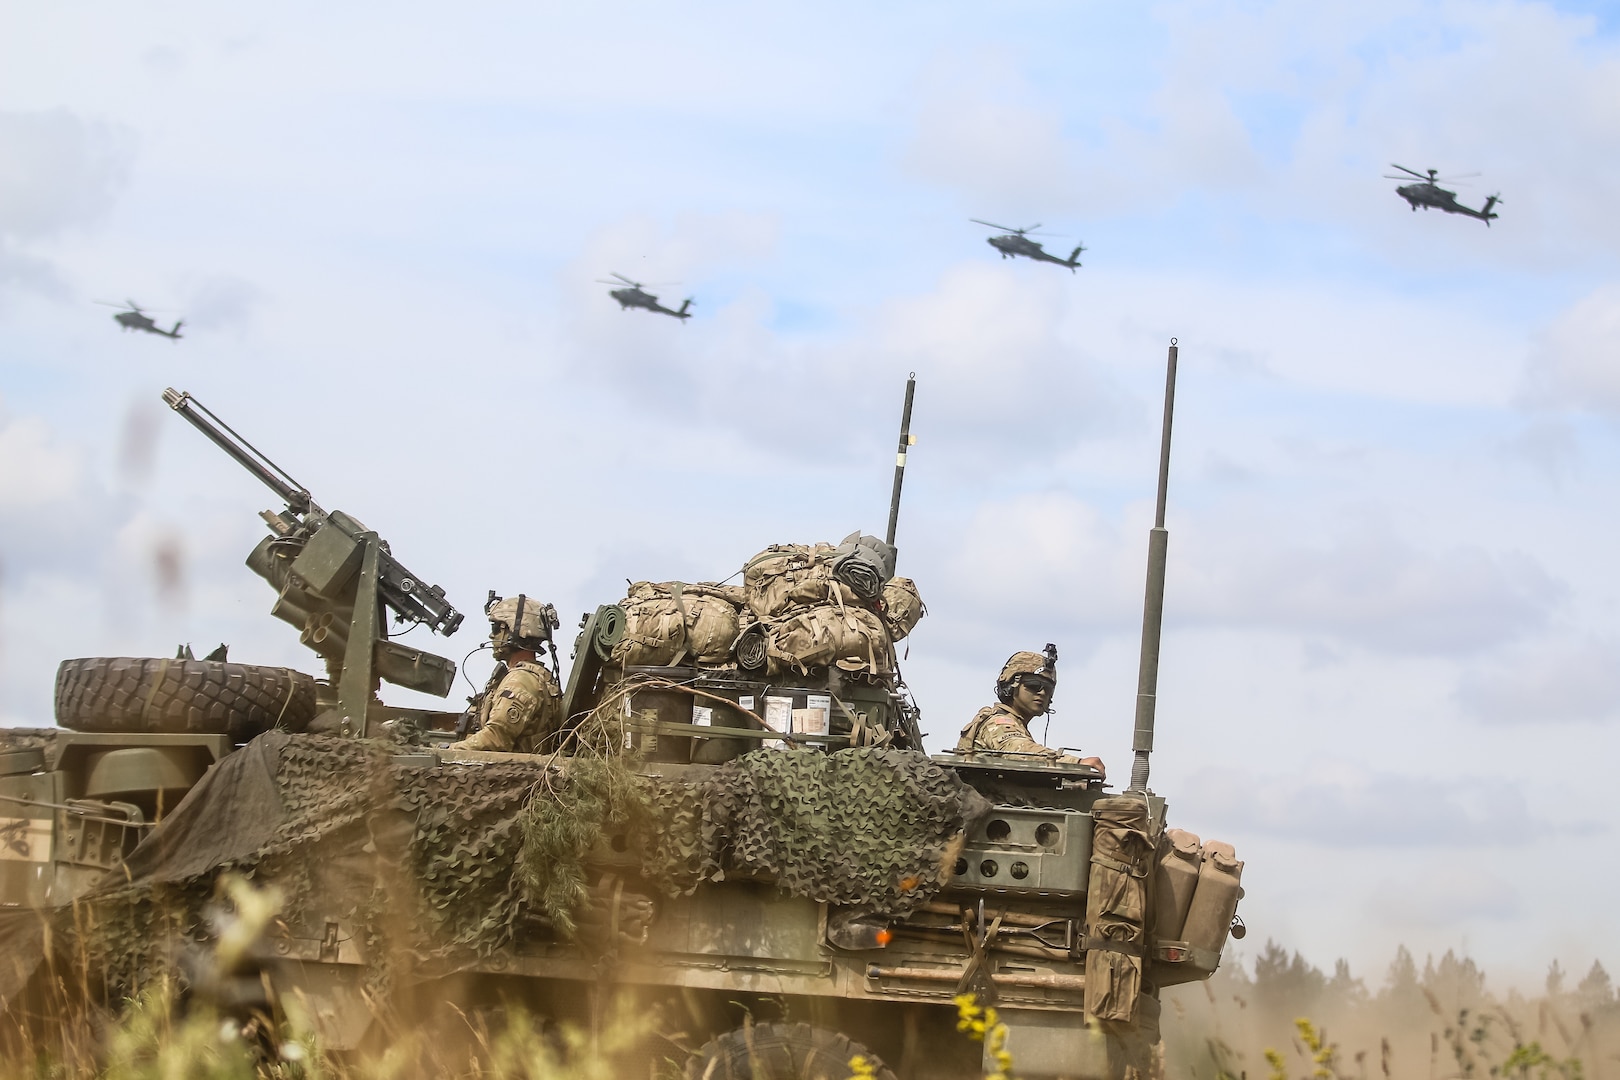 Interim Armored Vehicle “Stryker” and AH-64 Apache helicopters with Battle Group Poland move to secure area during lethality demonstration at Bemowo Piskie Training Area, Poland, June 15, 2018, as part of Saber Strike 18 (U.S. Army/Hubert D. Delany)